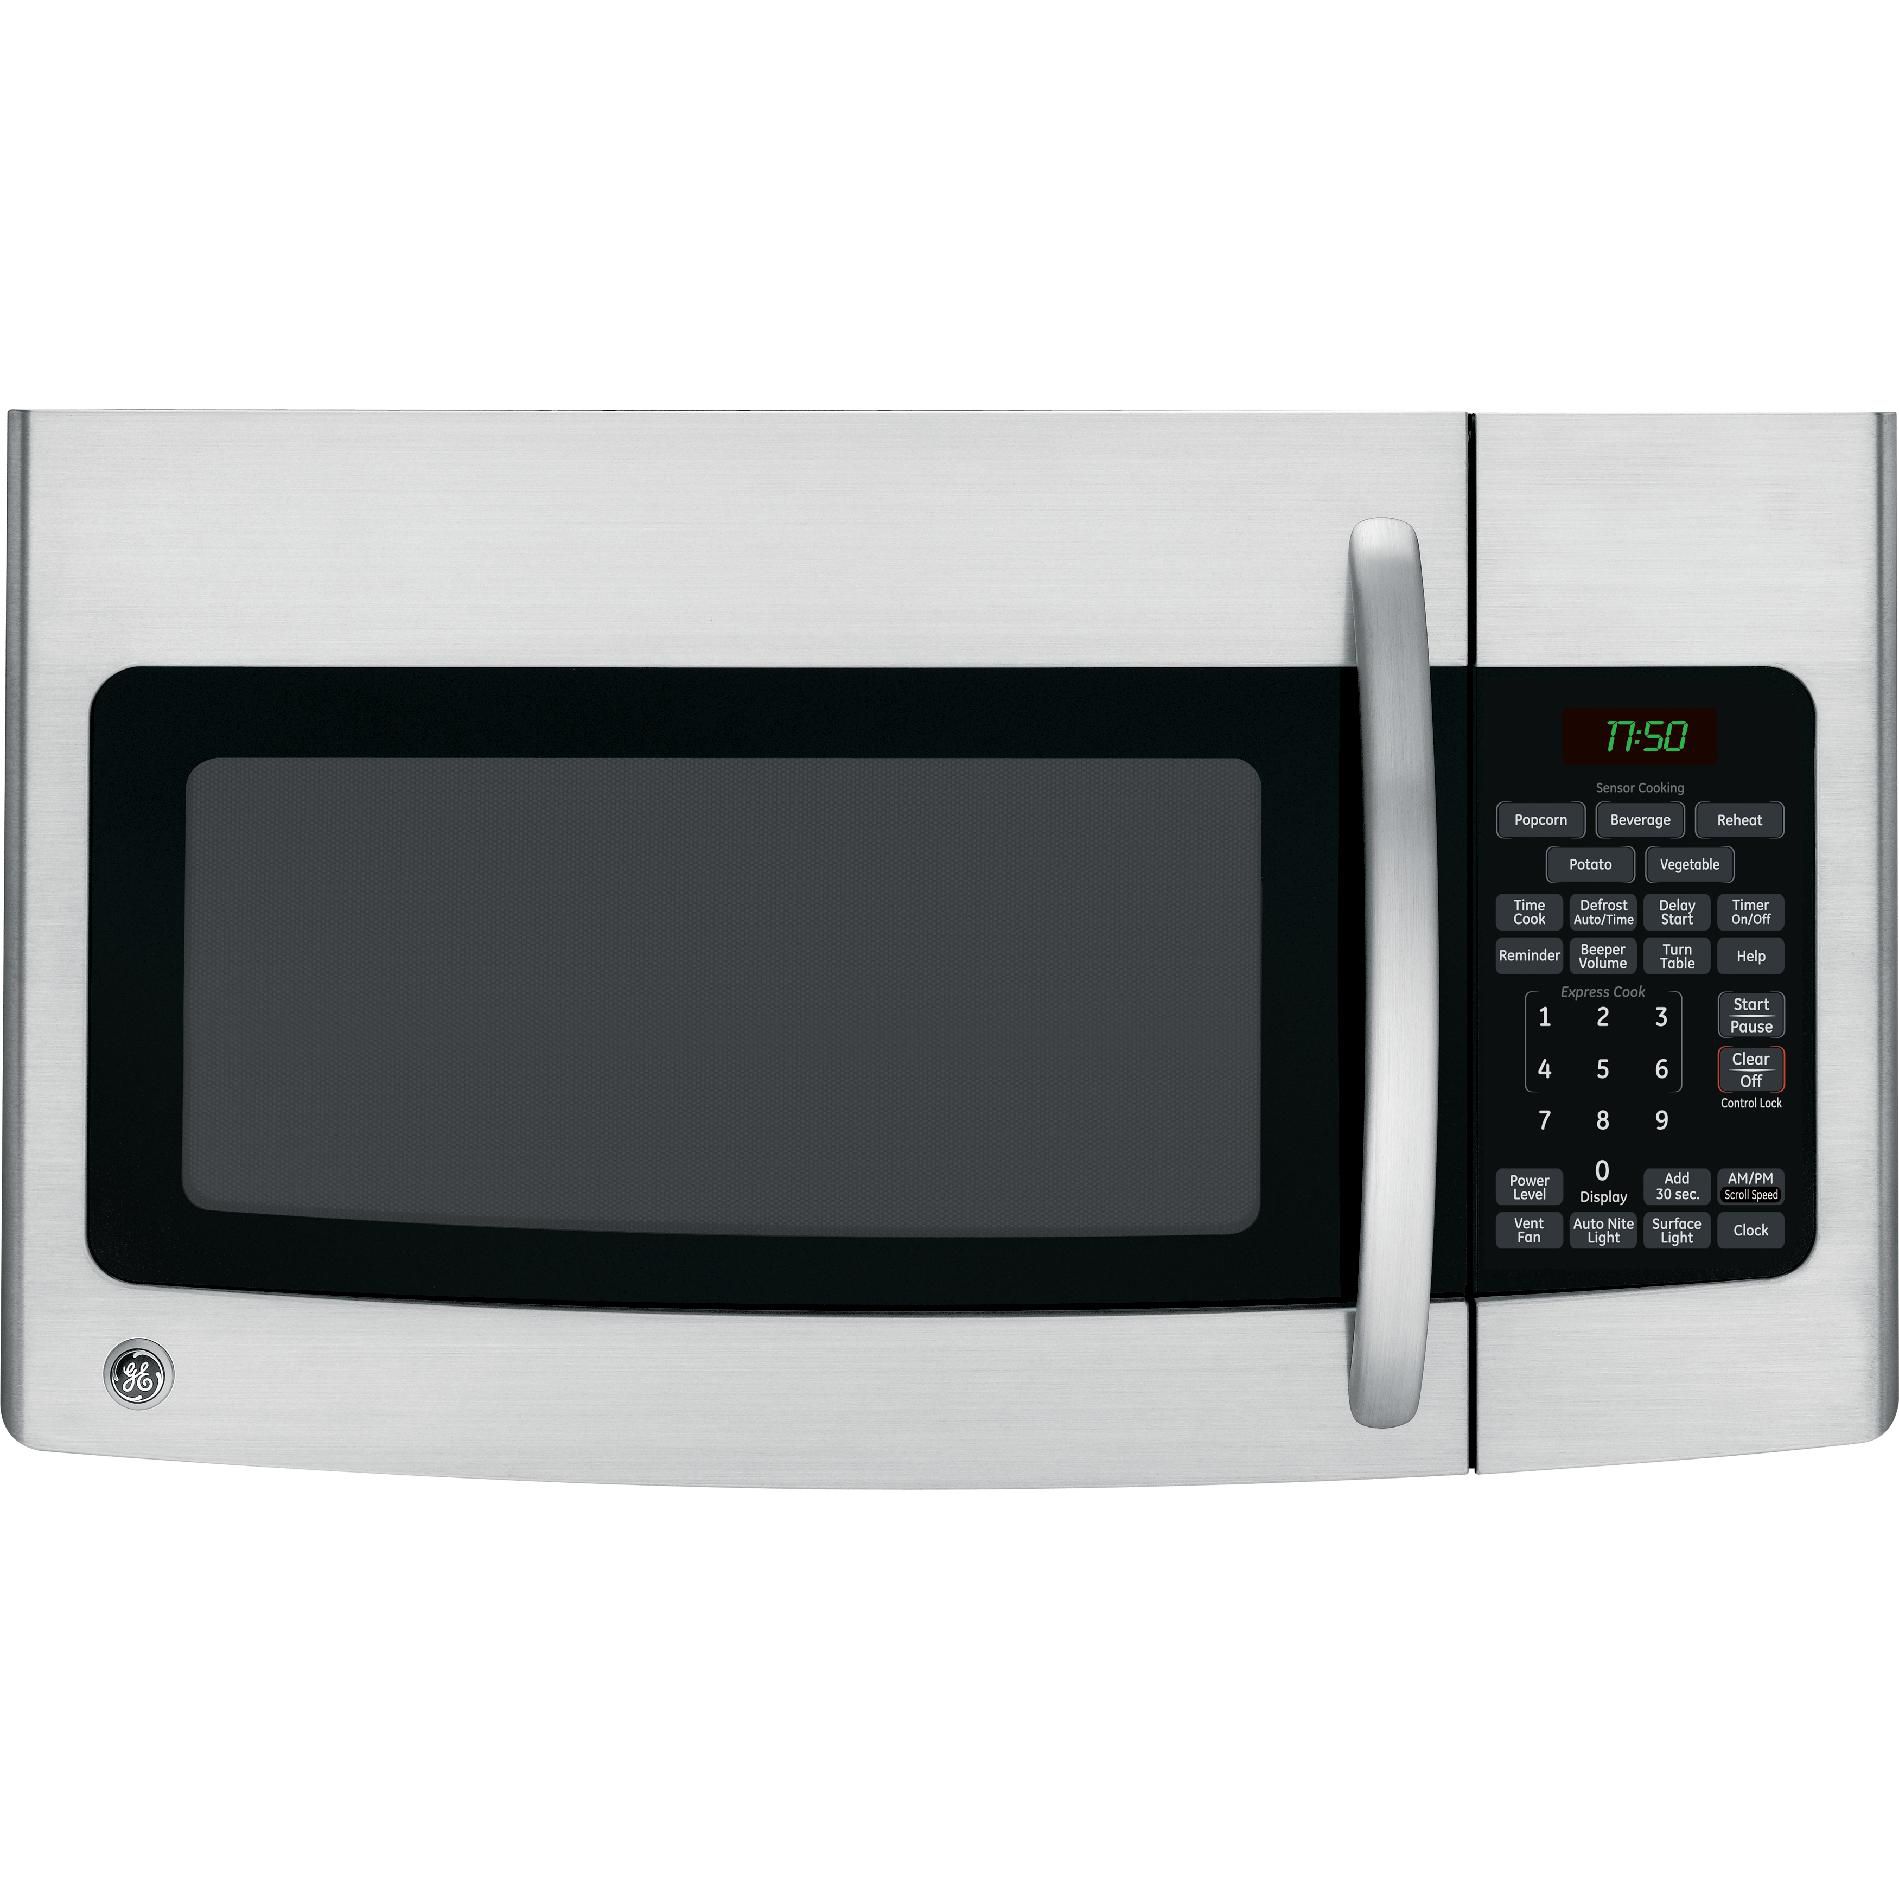 GE Appliances - JVM1750SPSS - 1.7 cu. ft. Microwave Oven - Stainless